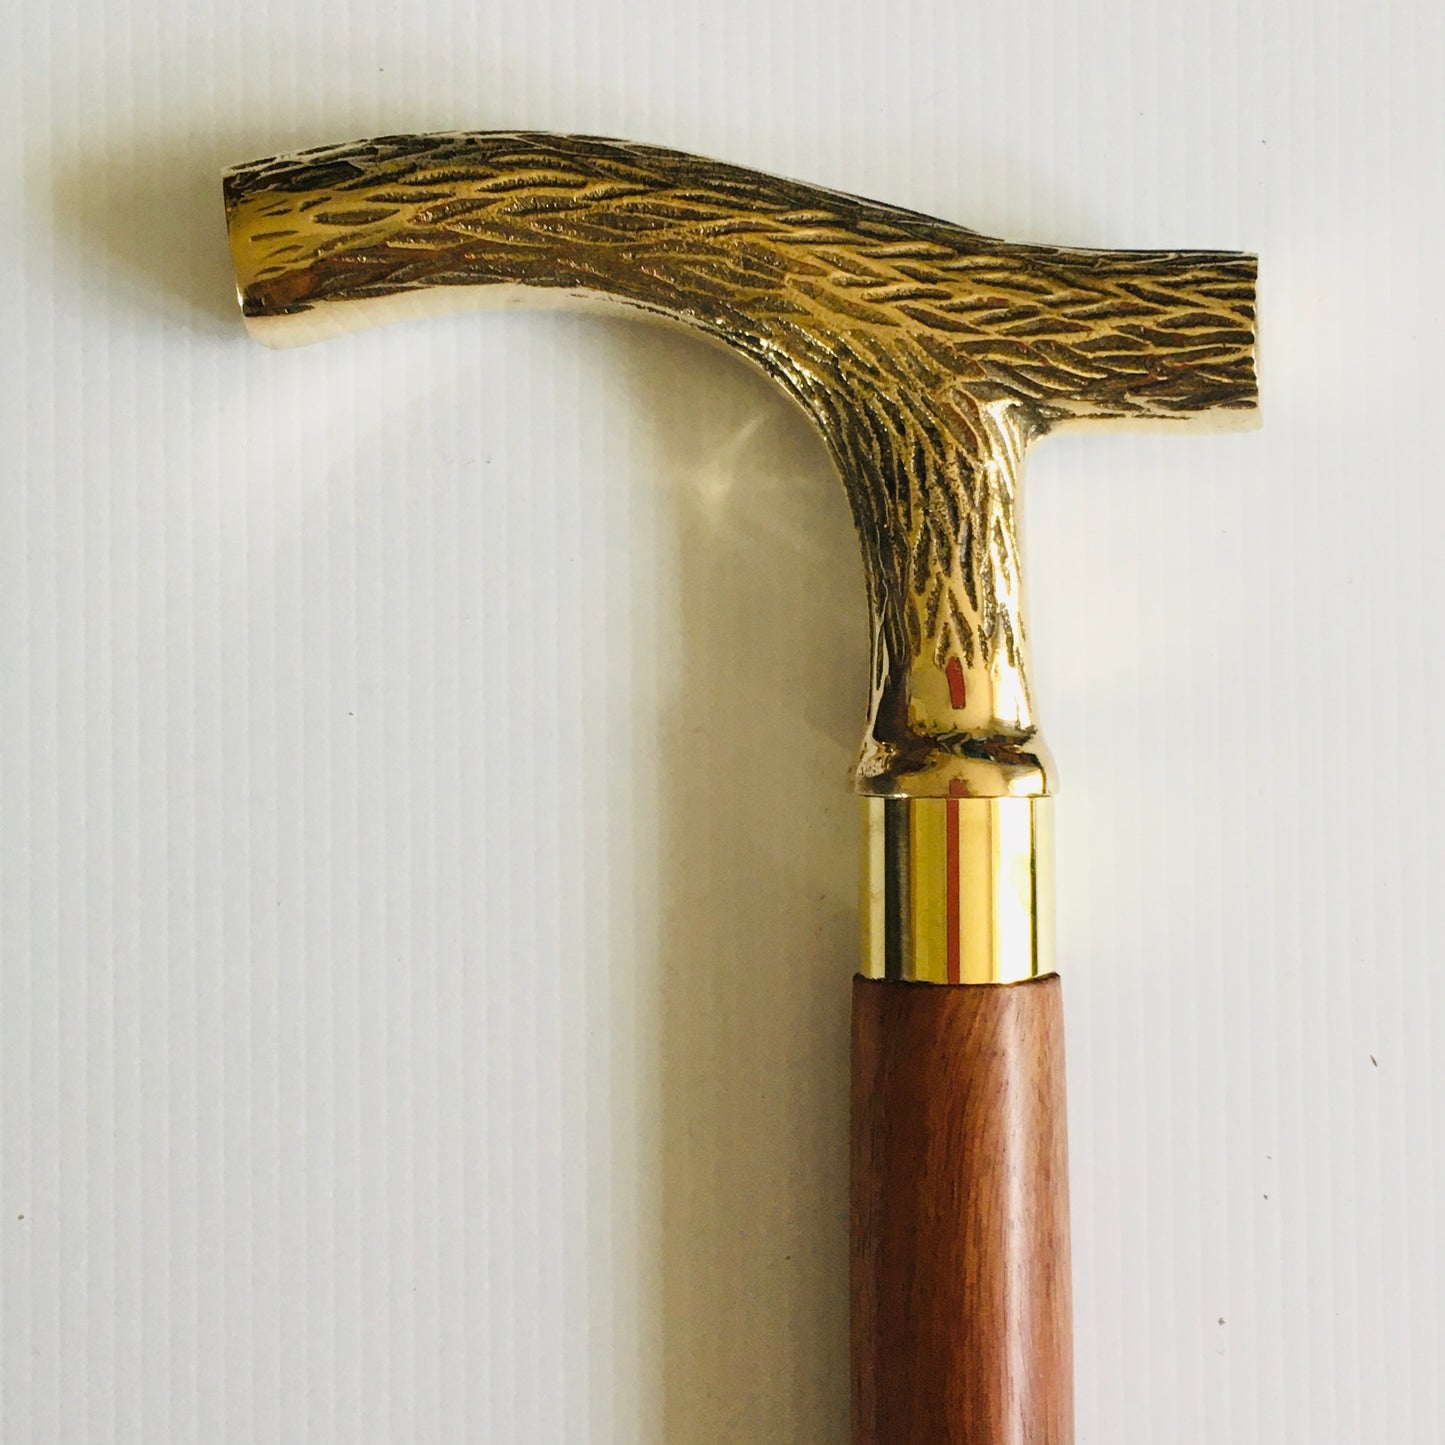 Walking Stick with Solid Brass( deer antler pattern )Handle on Brown inlaid stick